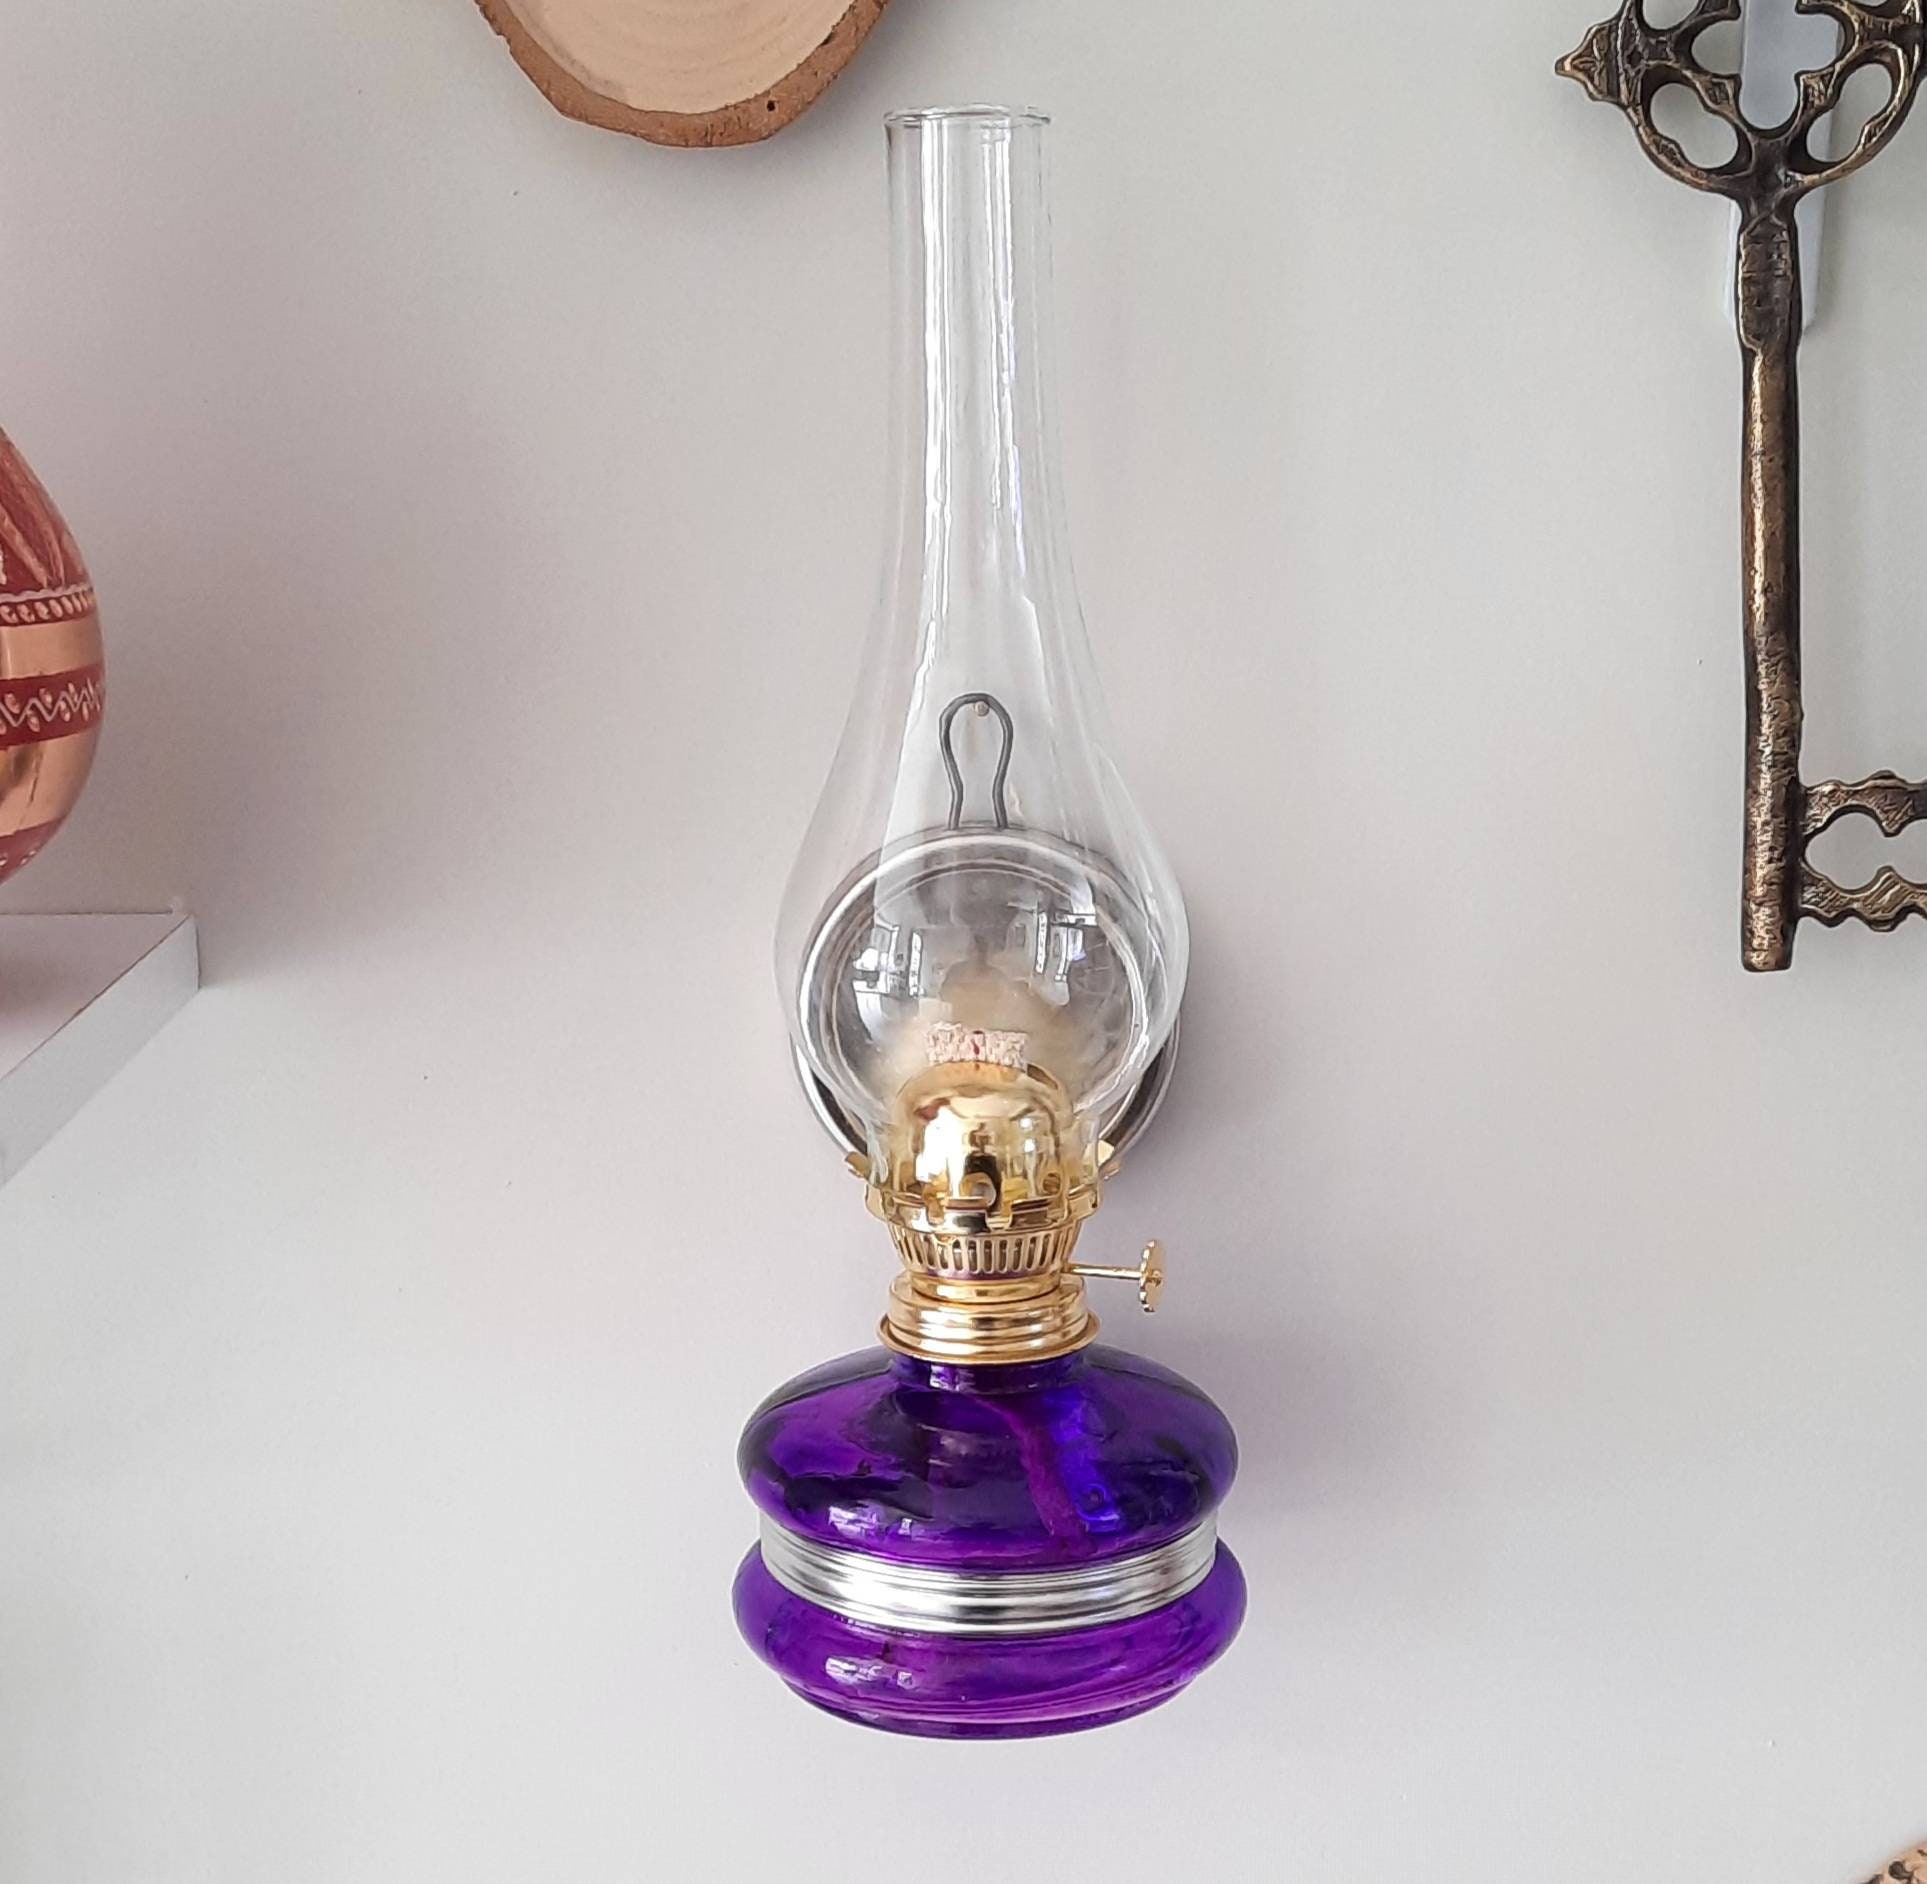 In Praise of Oil Lamps – A Pretty Happy Home